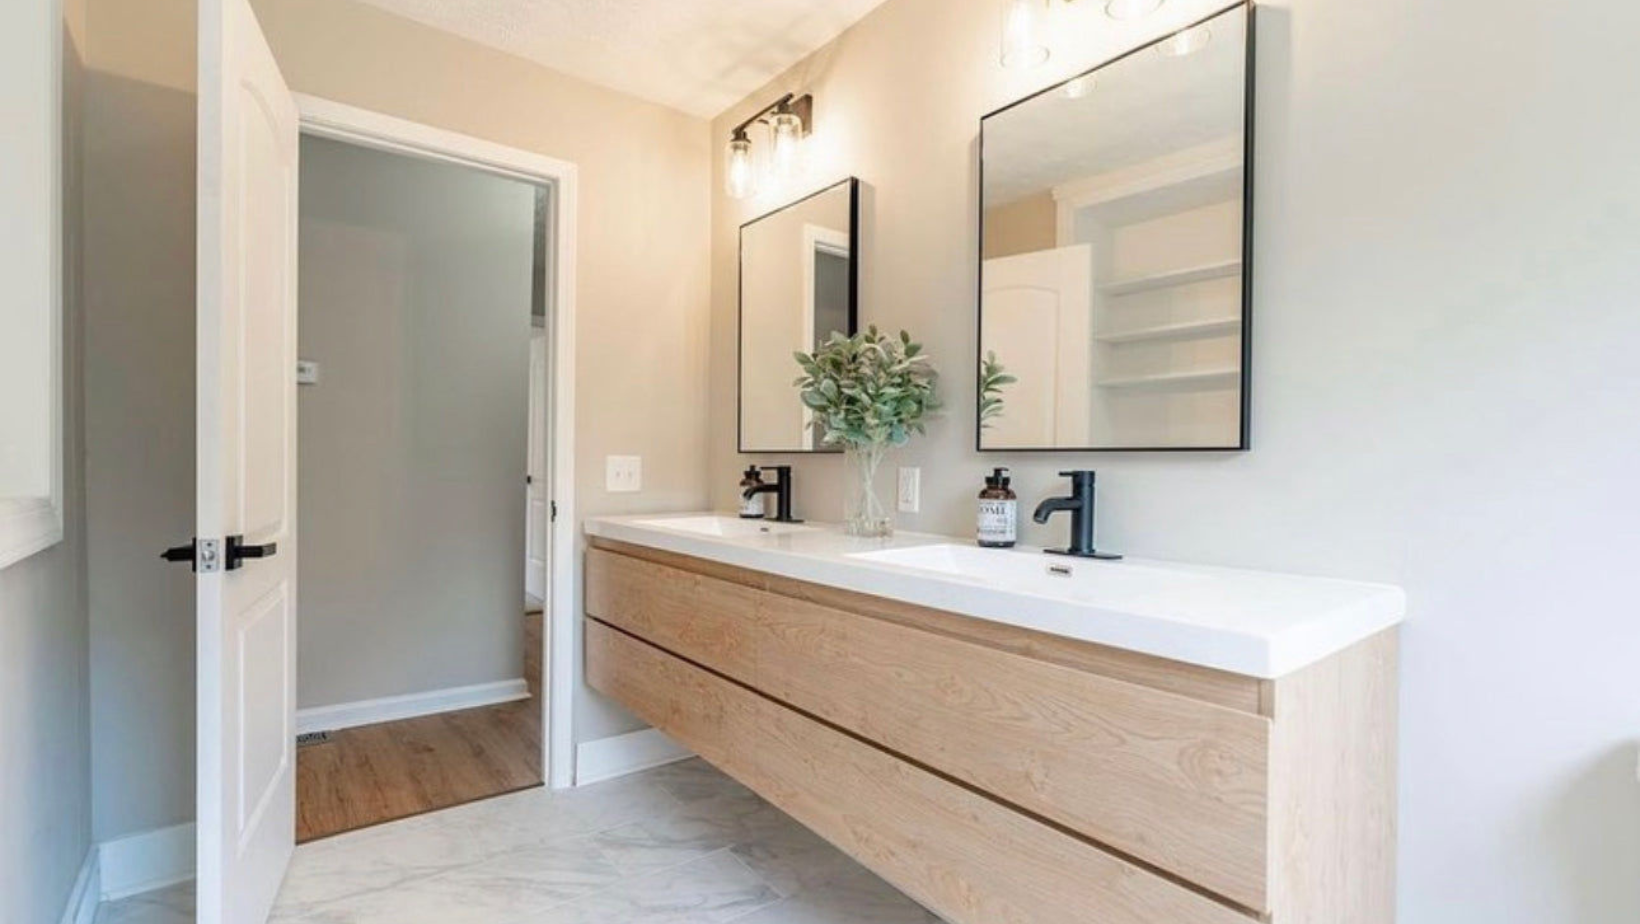 8 Storage Ideas for Bathrooms With Floating Sinks